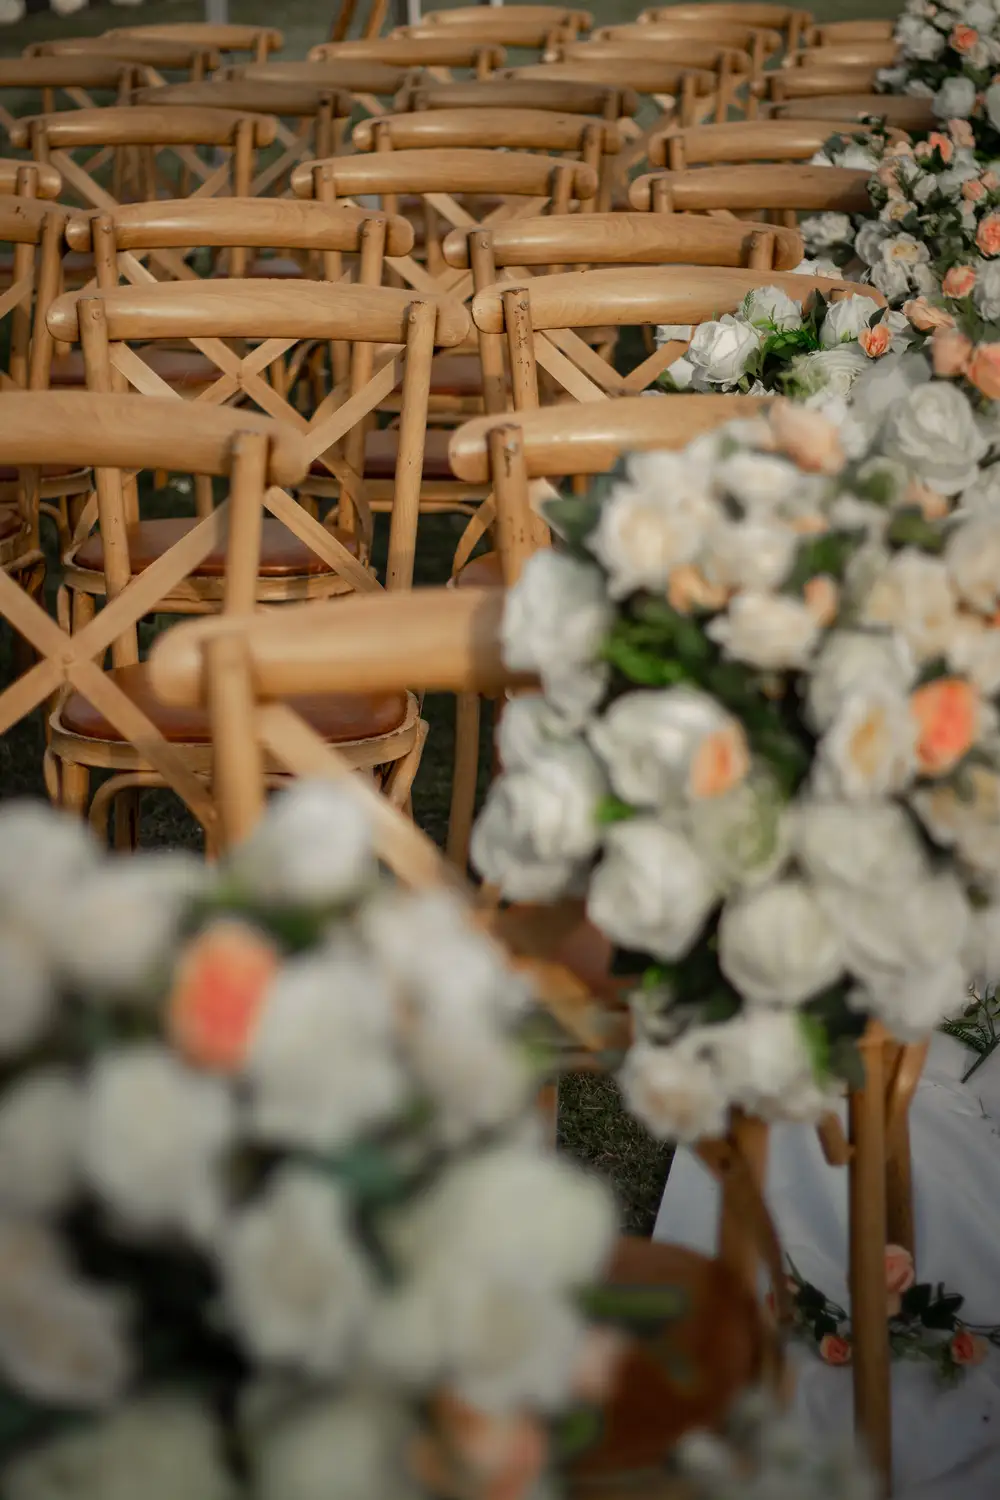 Flowers and chairs arrangement